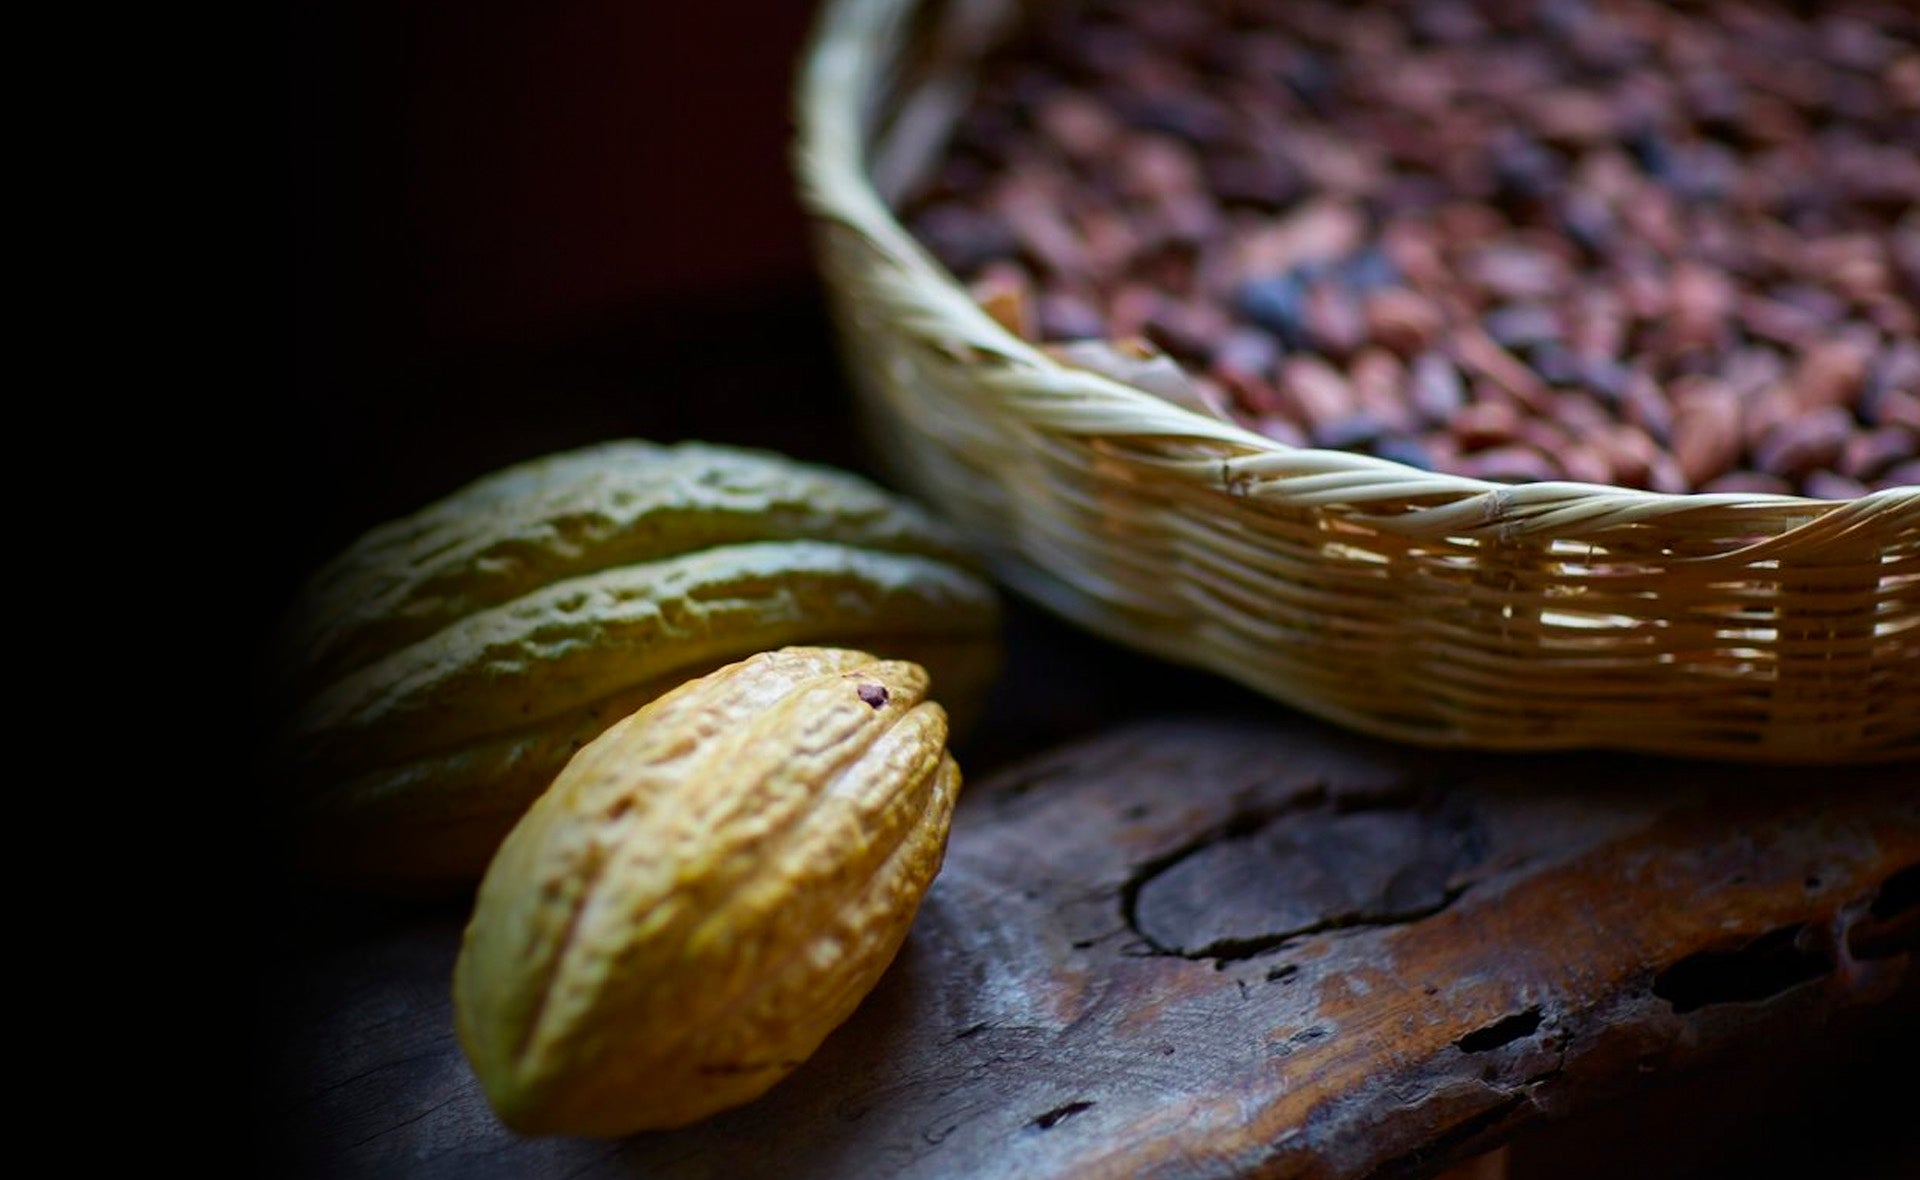 Cacao beans in a basket.